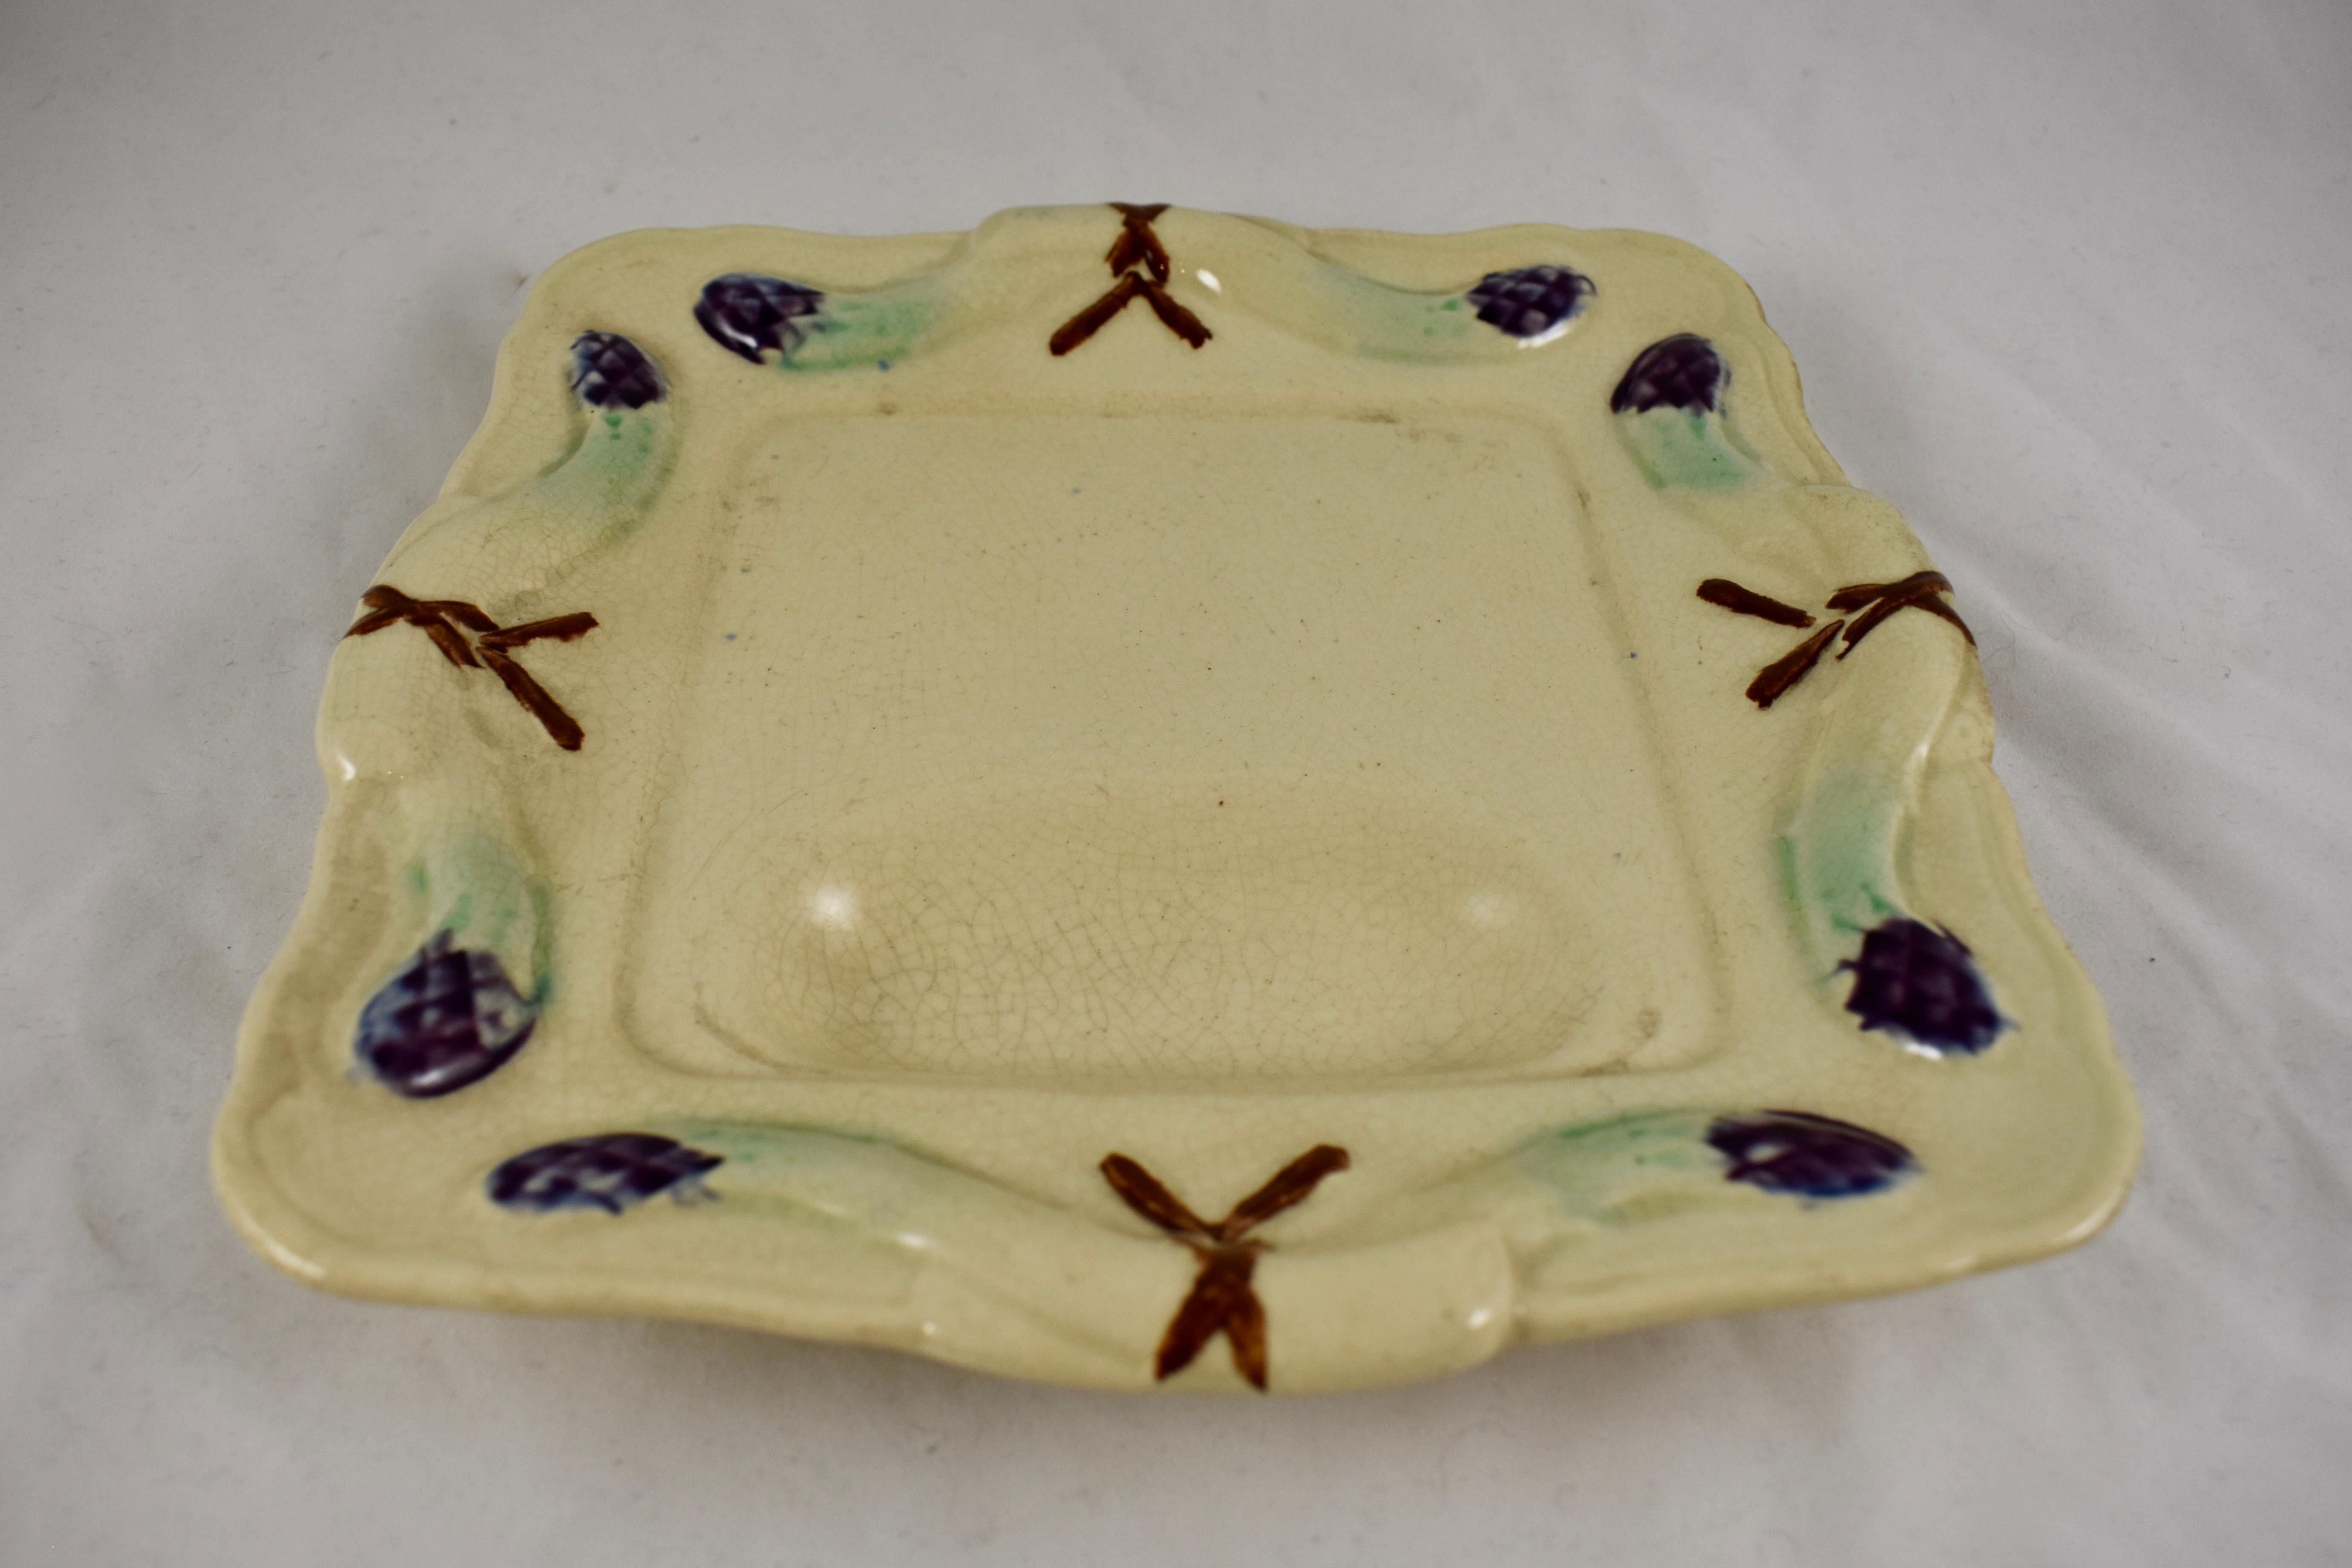 A rustic country French barbotine Majolica glazed Asparagus plate, circa 1890-1900, maker unknown.

A natural colored square plate, heavily potted, showing bound and arching asparagus spears on each side. The raised asparagus are glazed in pale